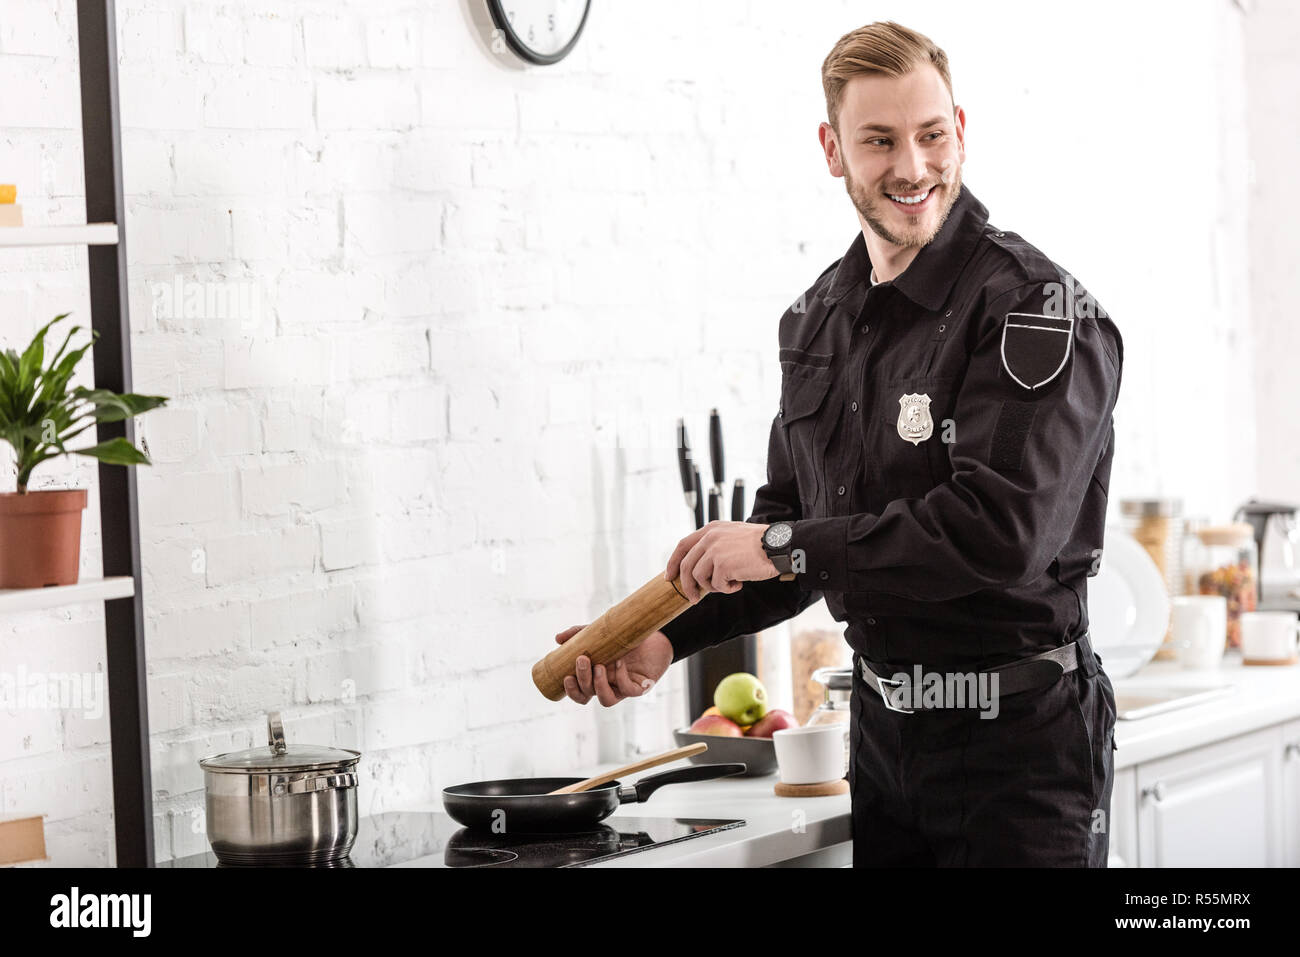 police officer smiling and cooking breakfast at kitchen Stock Photo - Alamy